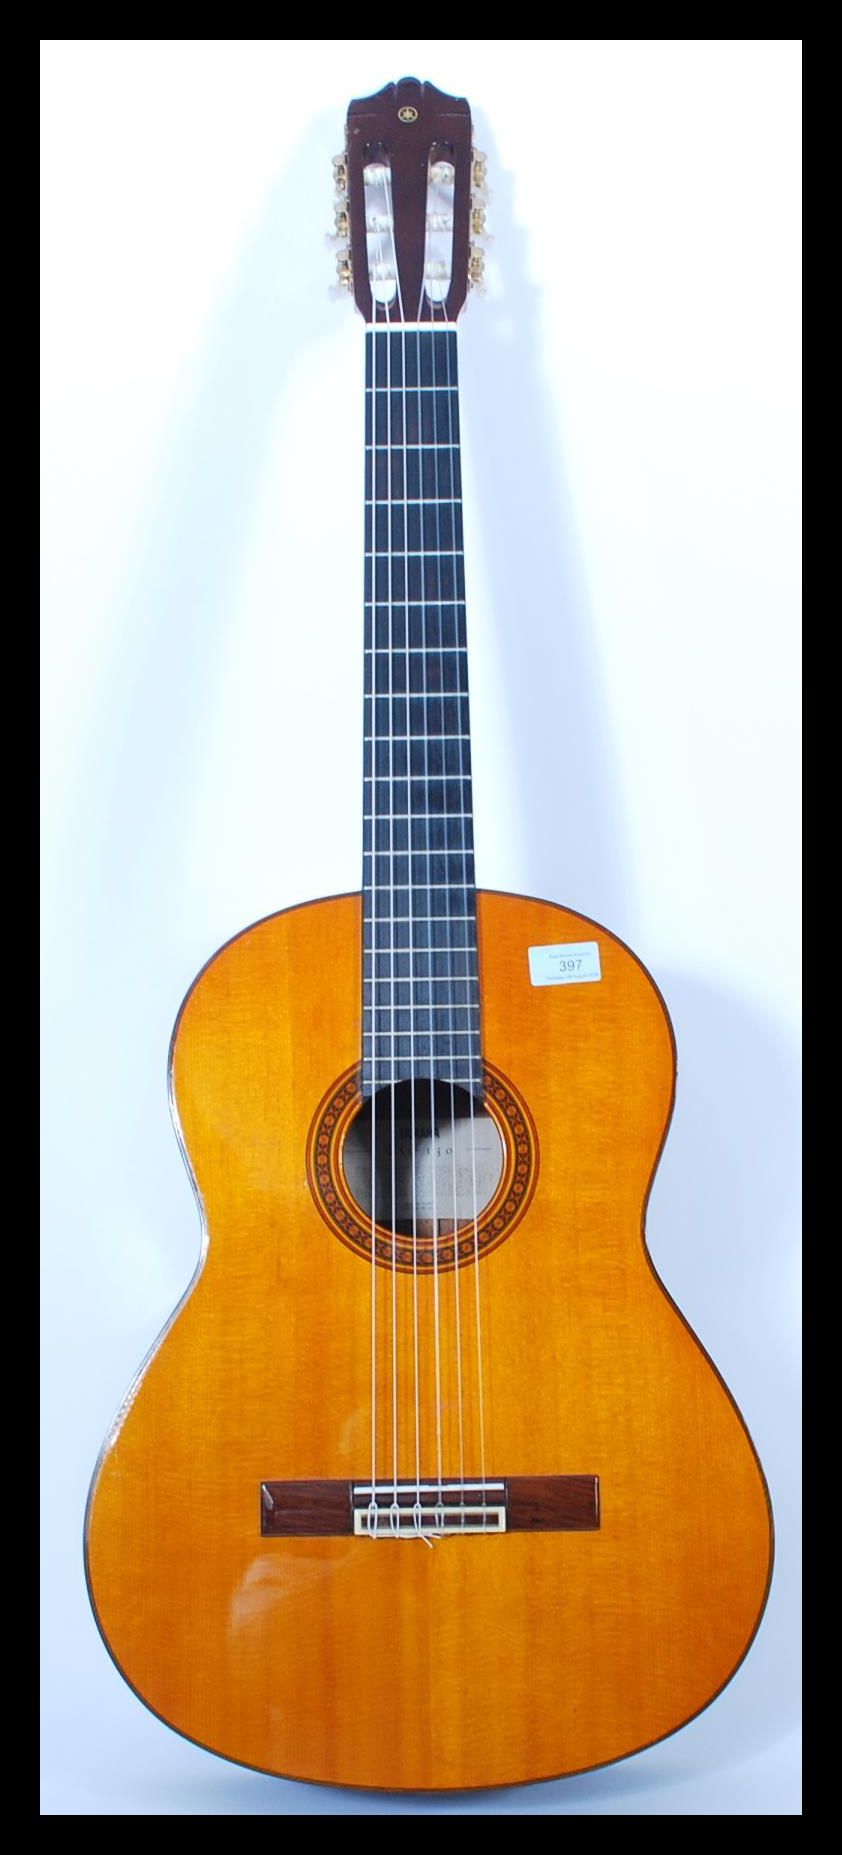 A vintage Yamaha six string acoustic guitar model CG 130 having a shaped hollow body with mother